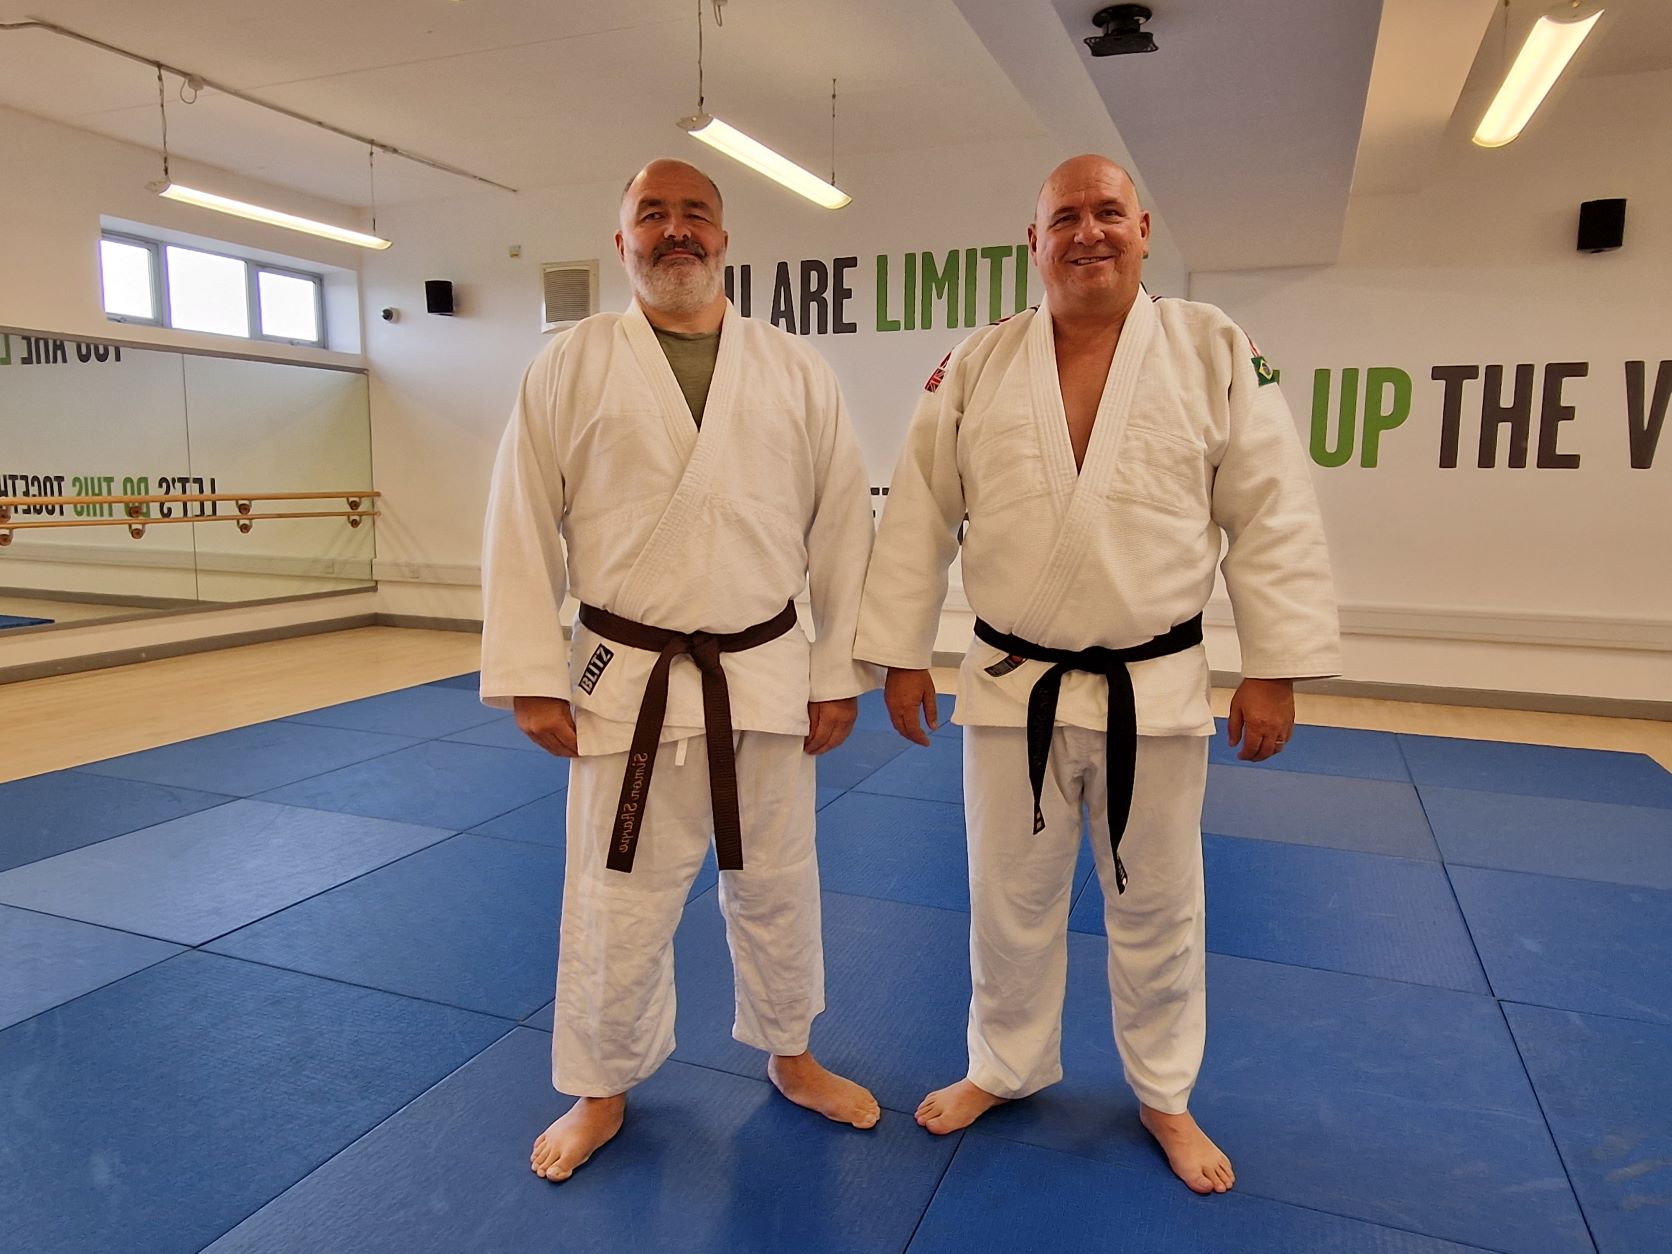 Sight Loss Council member Simon Sharpe (left) with Ian Sidaway, Head Coach and Knottingley Judo Club (right), stood side-by-side before starting a judo session.